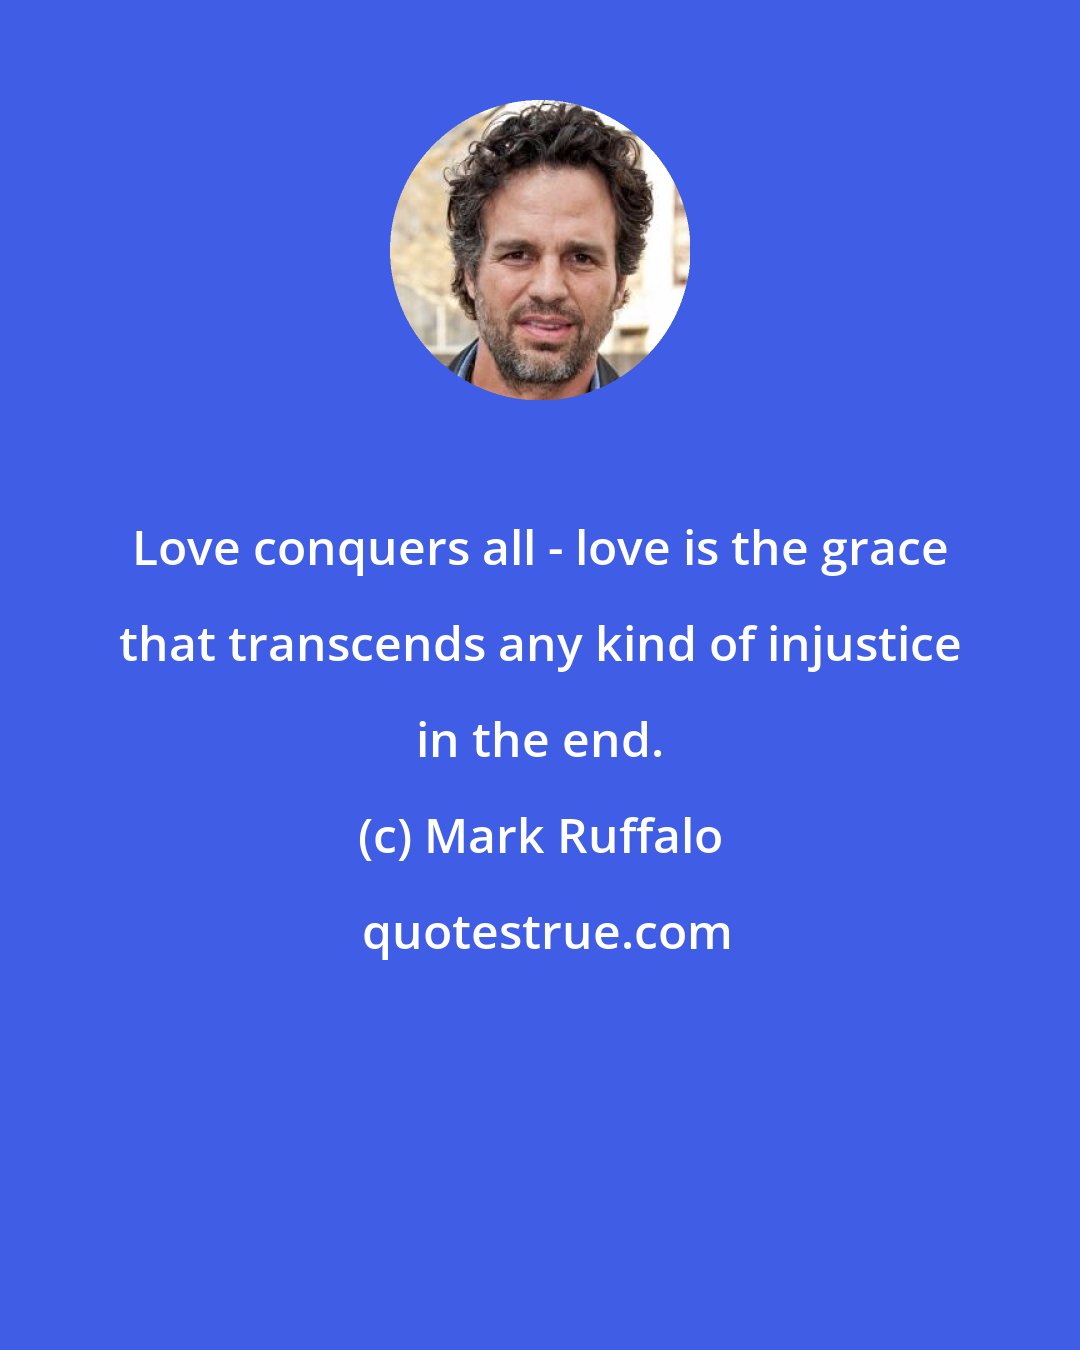 Mark Ruffalo: Love conquers all - love is the grace that transcends any kind of injustice in the end.